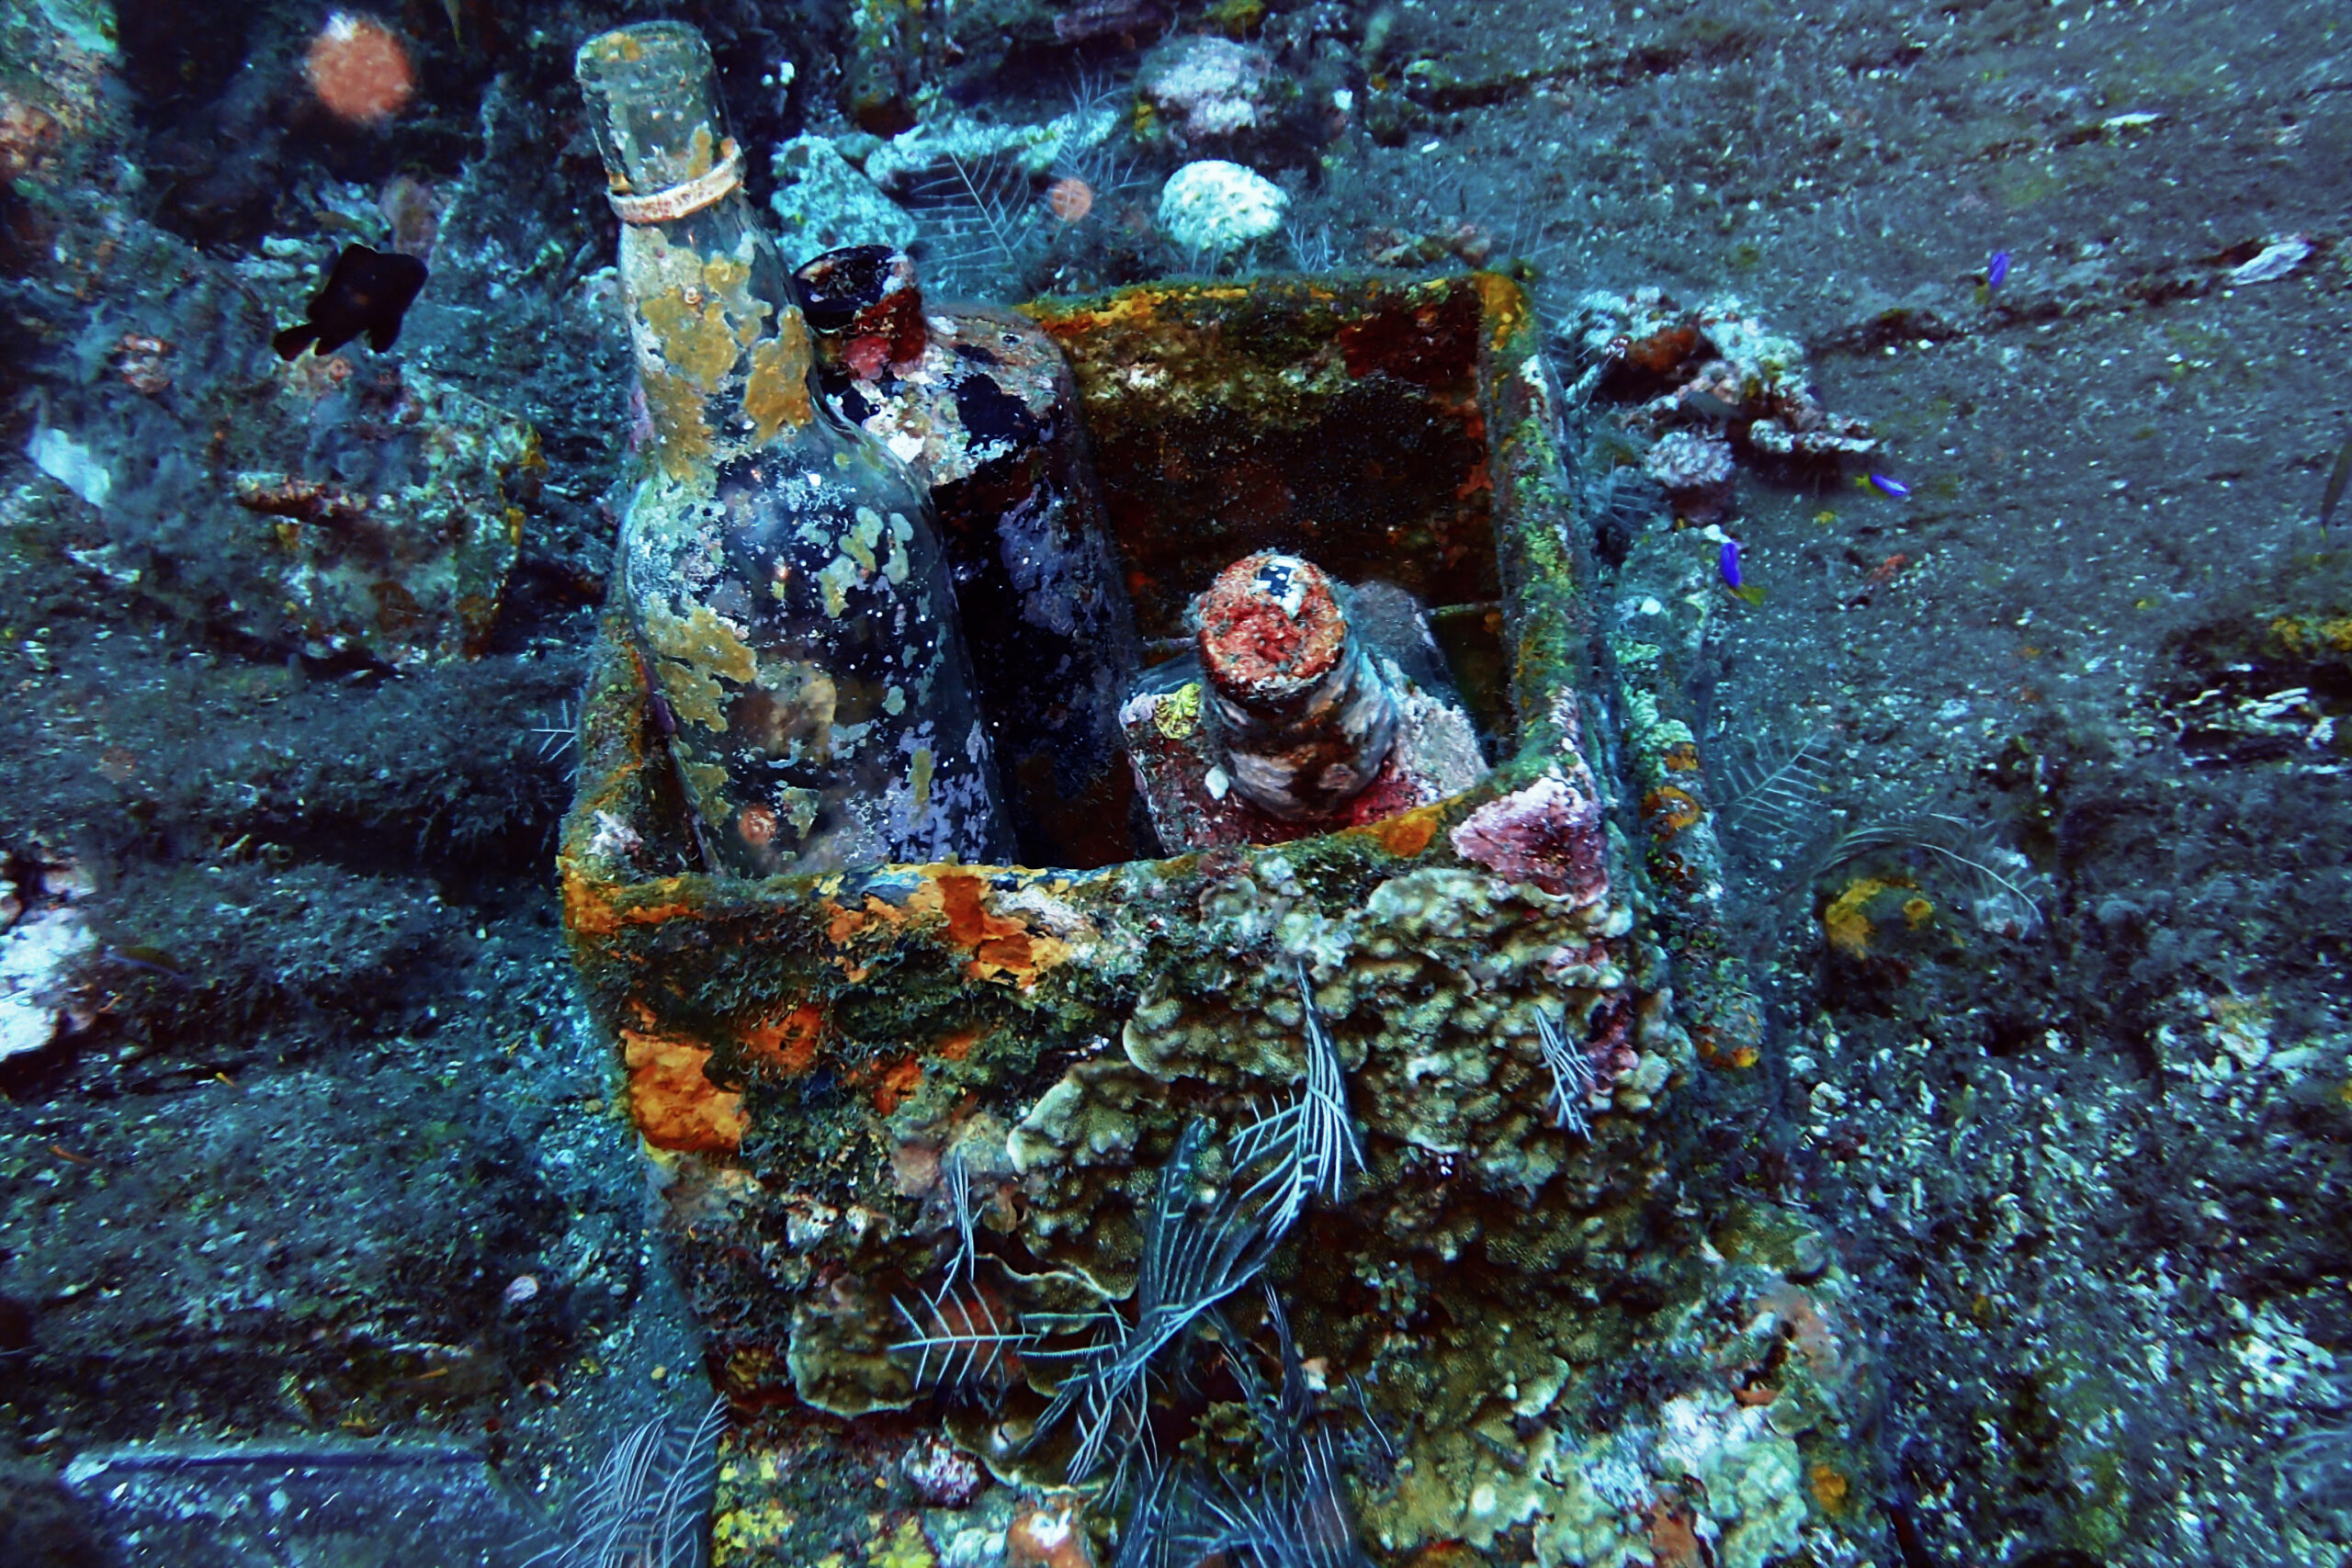 A box of bottles on the Boga Wreck in Kubu, Bali. There is more than just the USAT Liberty shipwreck in Bali. Dive in Bali and explore more dive sites.